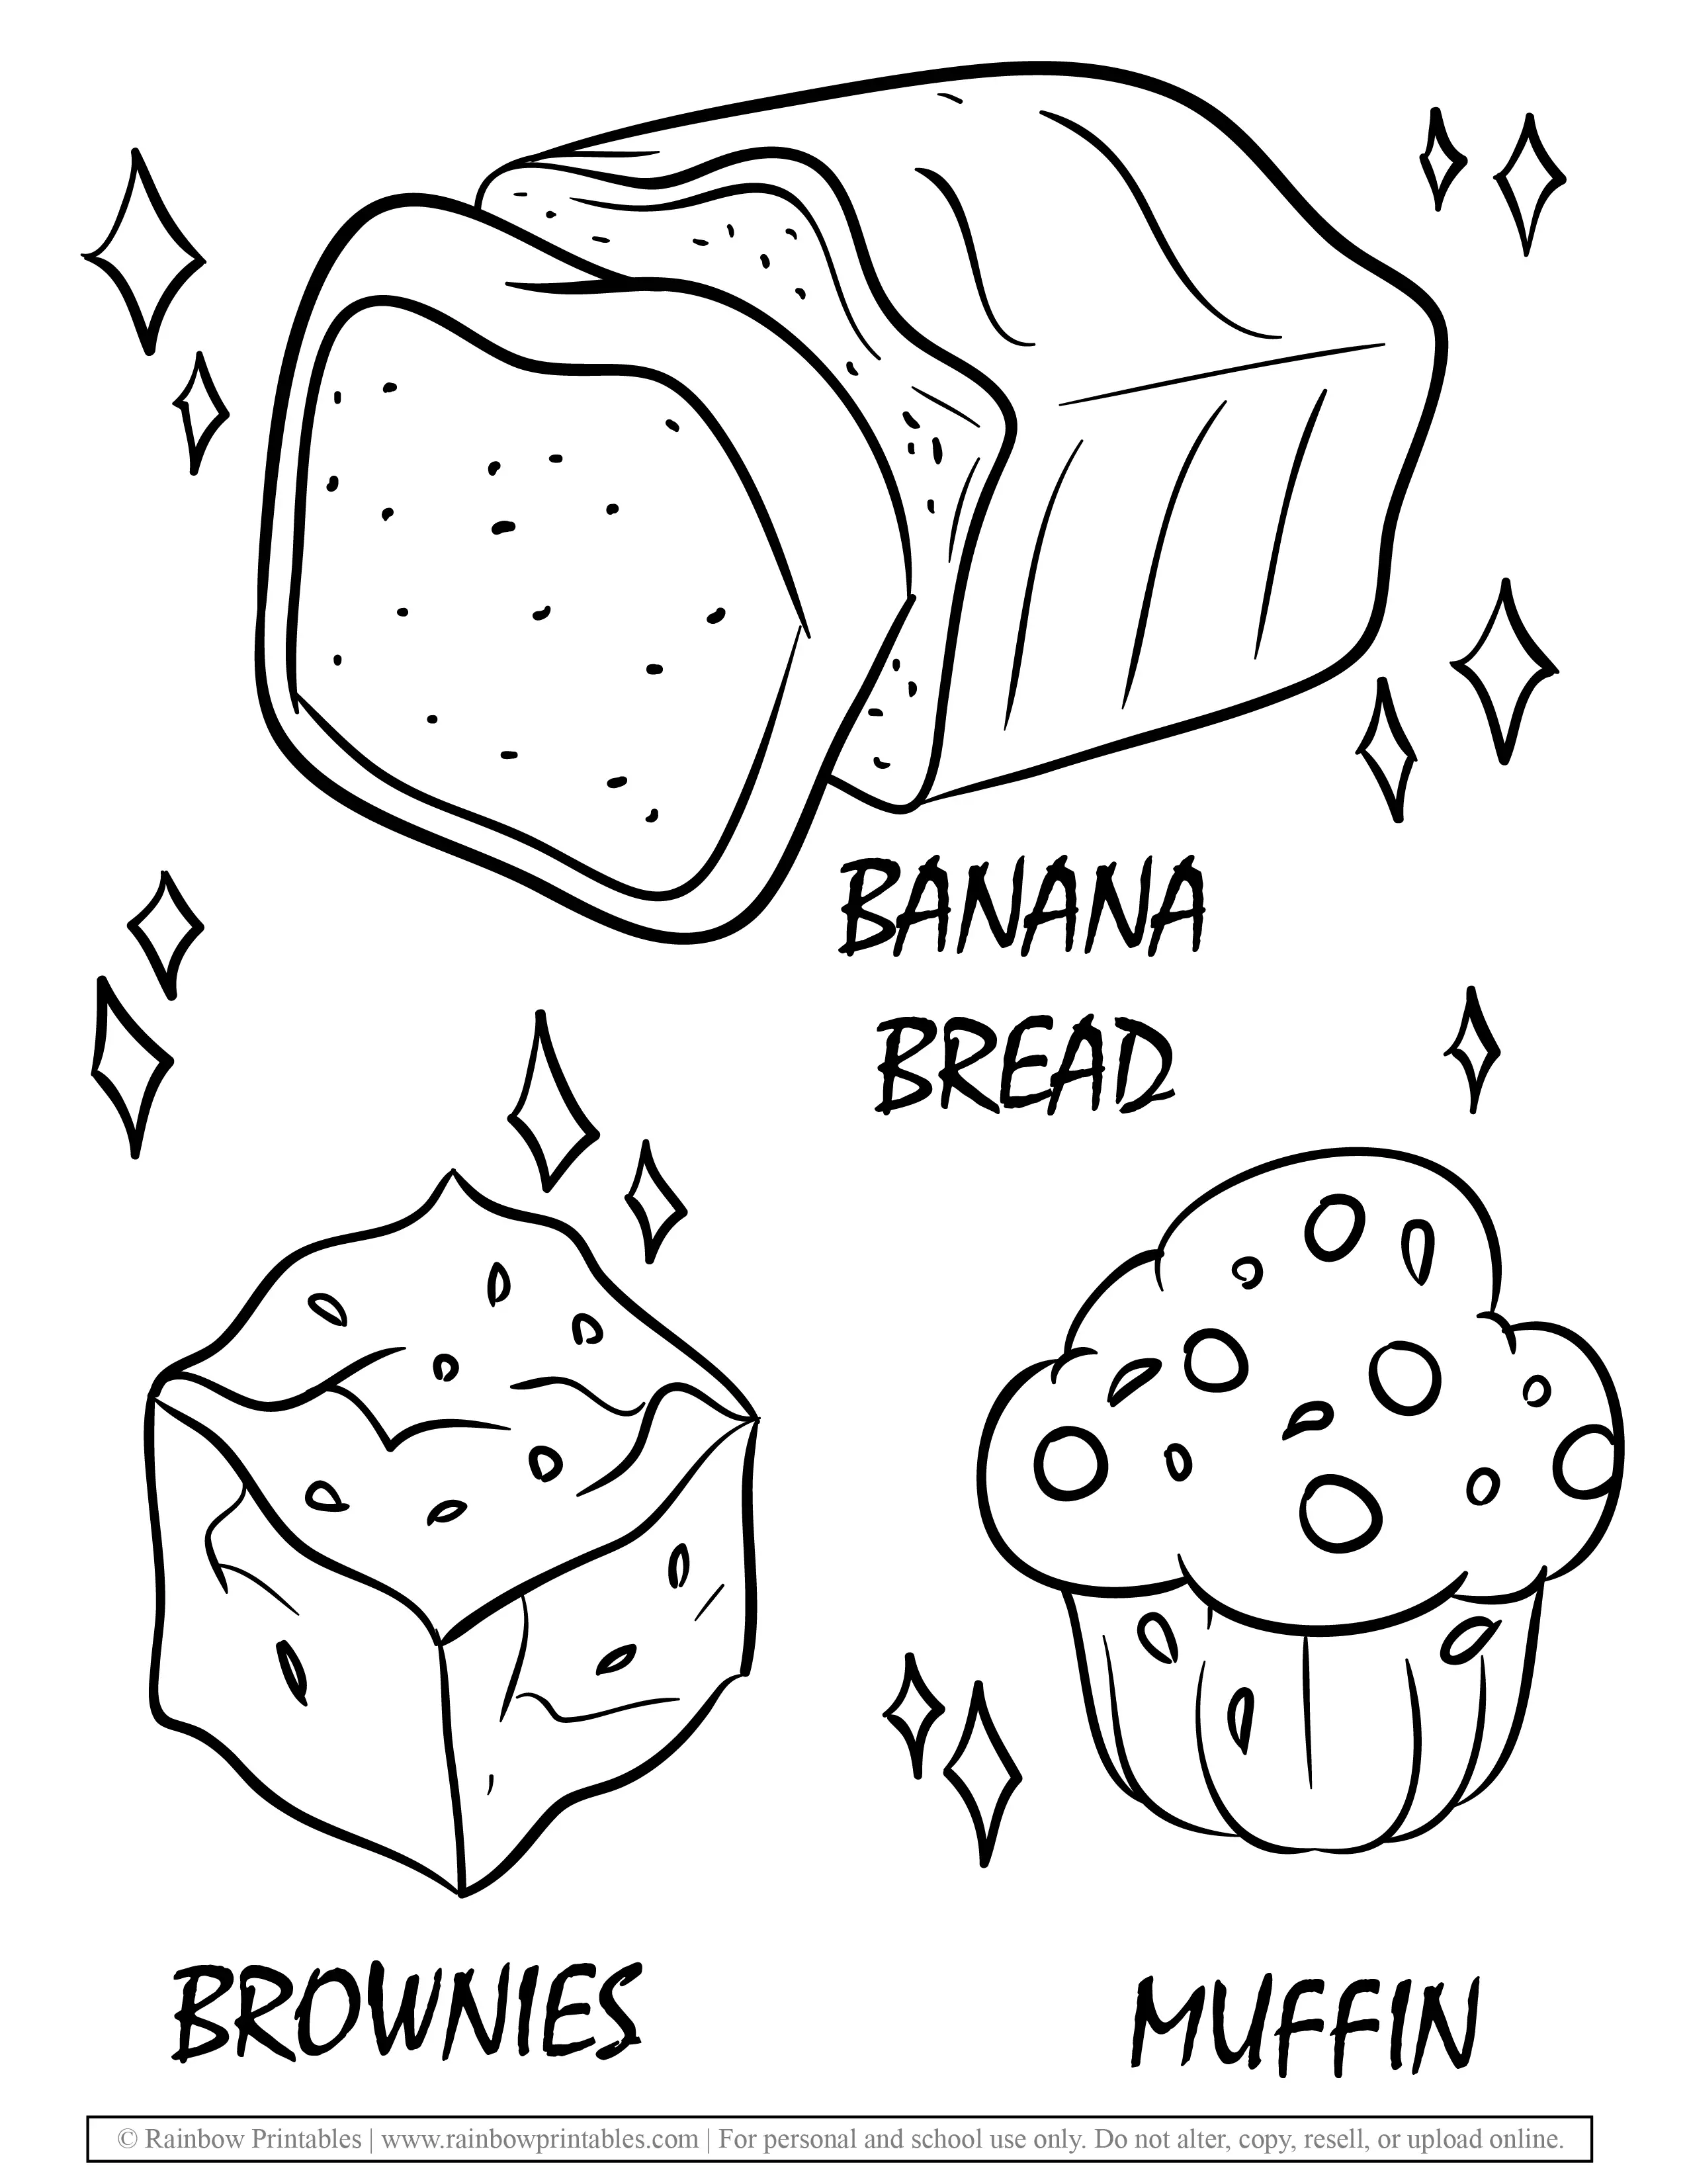 Breakfast Food Dessert BANANA BREAD BROWNIES MUFFINS Coloring Pages for Kids Delicious Yummy Foodie